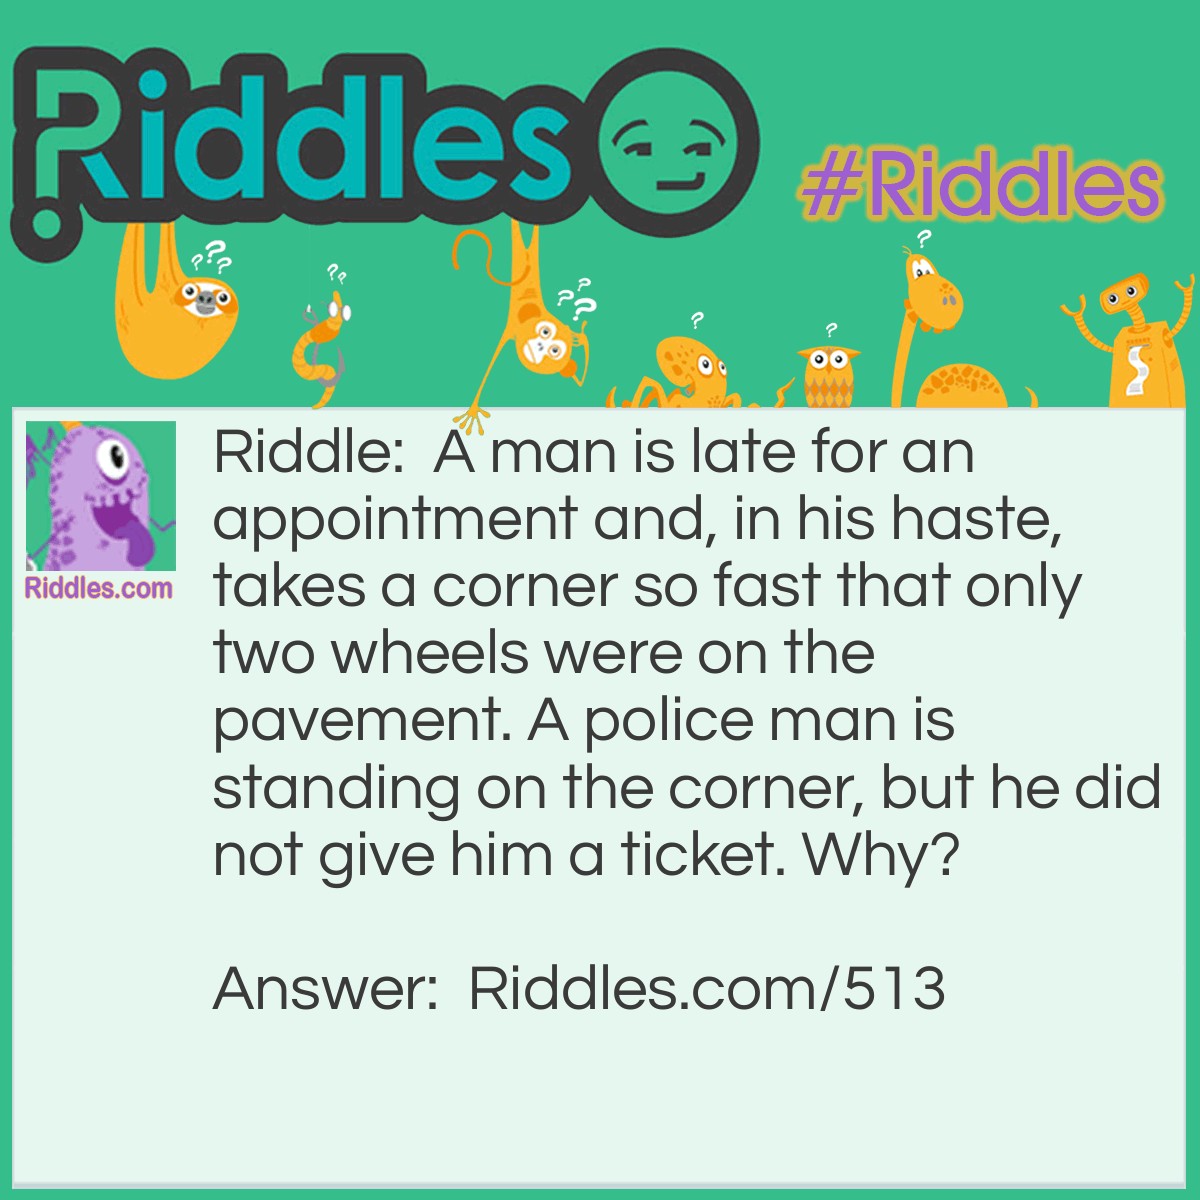 Riddle: A man is late for an appointment and, in his haste, takes a corner so fast that only two wheels were on the pavement. A police man is standing on the corner, but he did not give him a ticket. Why? Answer: He was on a motorcycle.